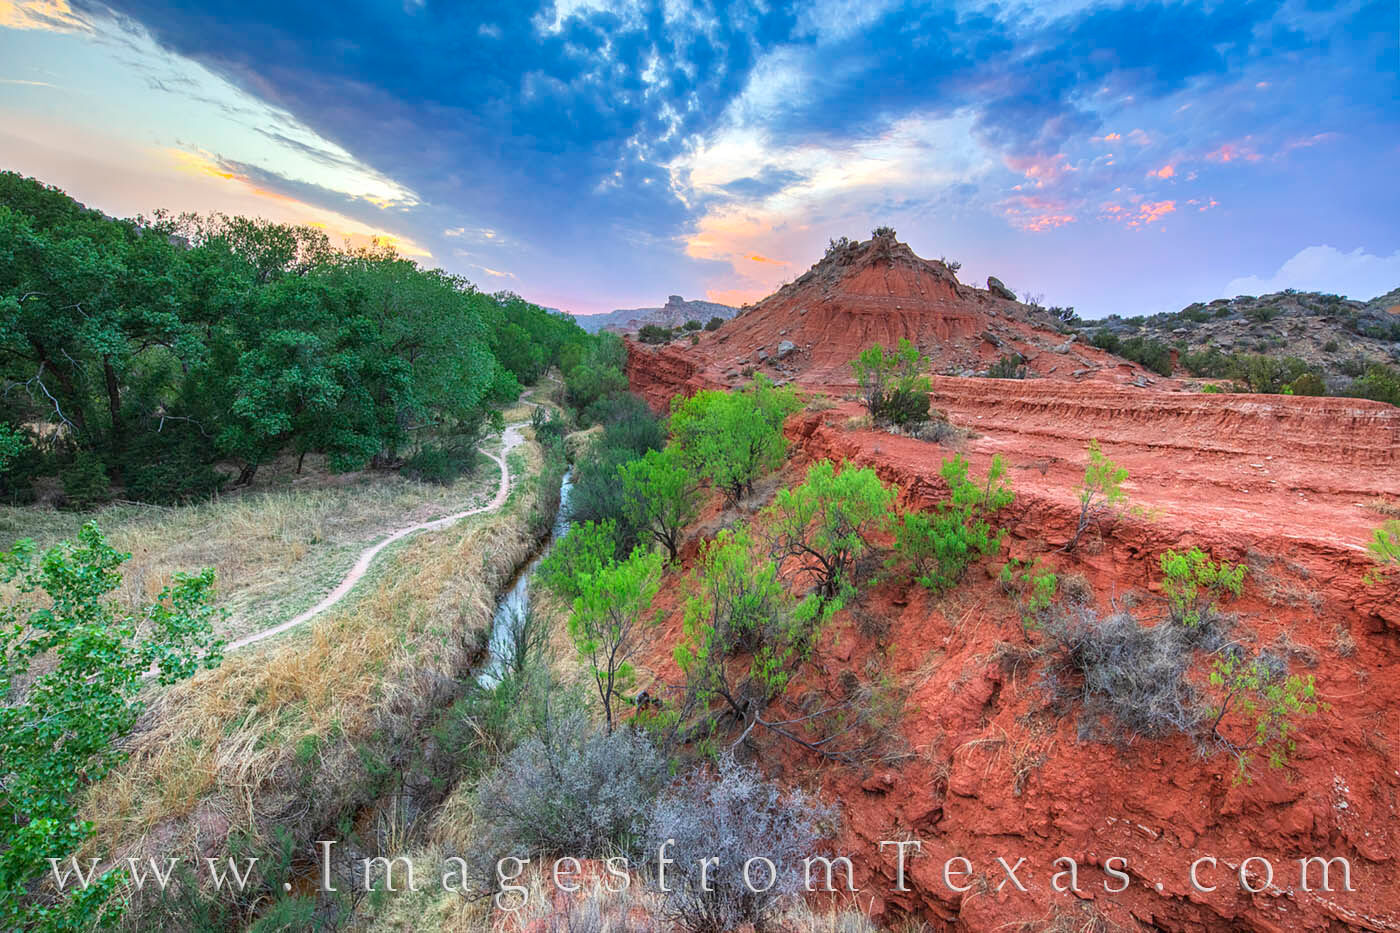 The end of day brings a beautiful sunset over South Brushy Draw near the Hackberry campground. Palo Duro Canyon State Park offers...